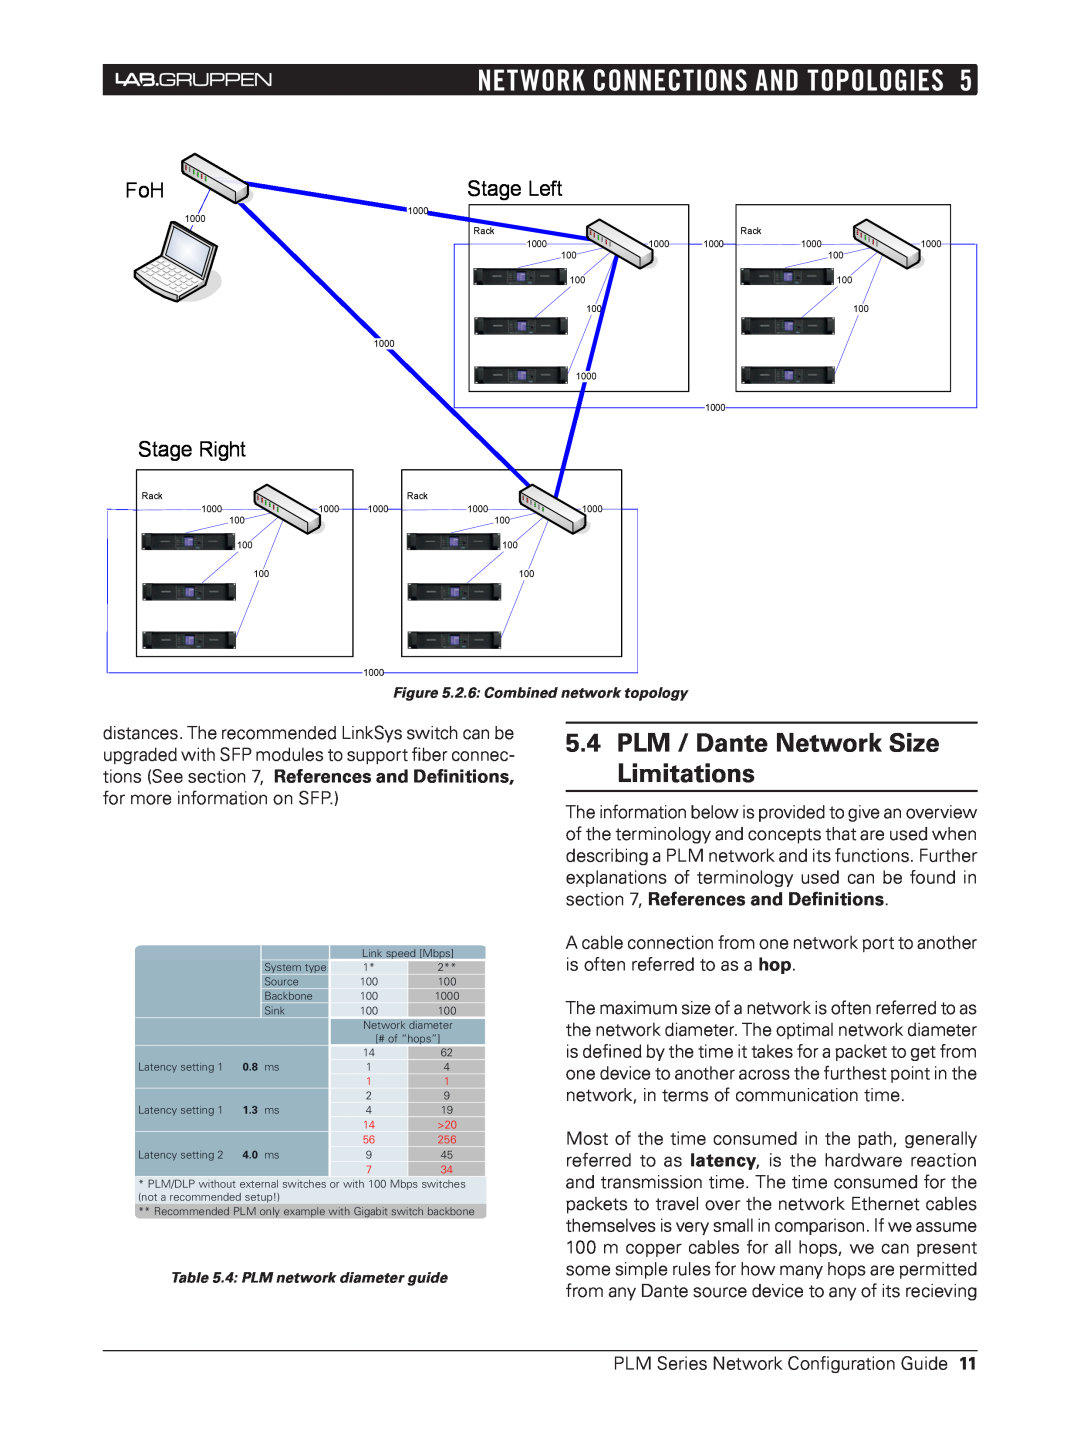 3Com NCG-PLM manual 5.4PLM / Dante Network Size Limitations, Network Connections and Topologies, Stage Left, Stage Right 